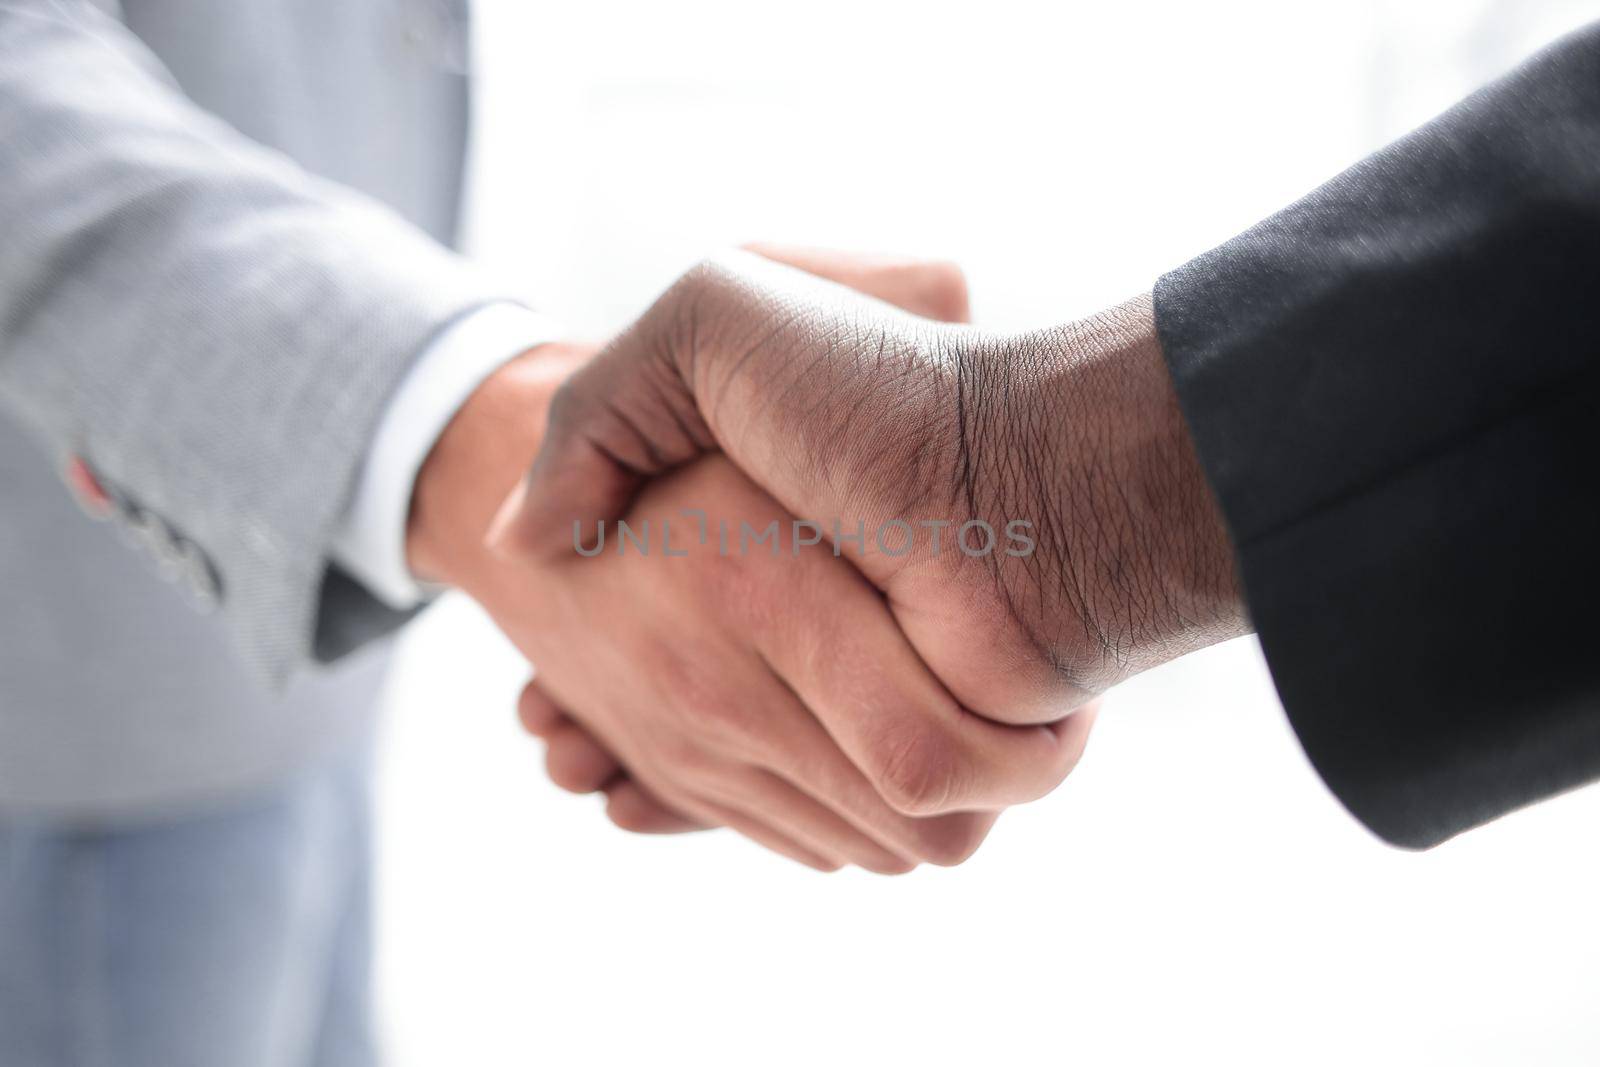 Business people closing a deal and handshaking at the office